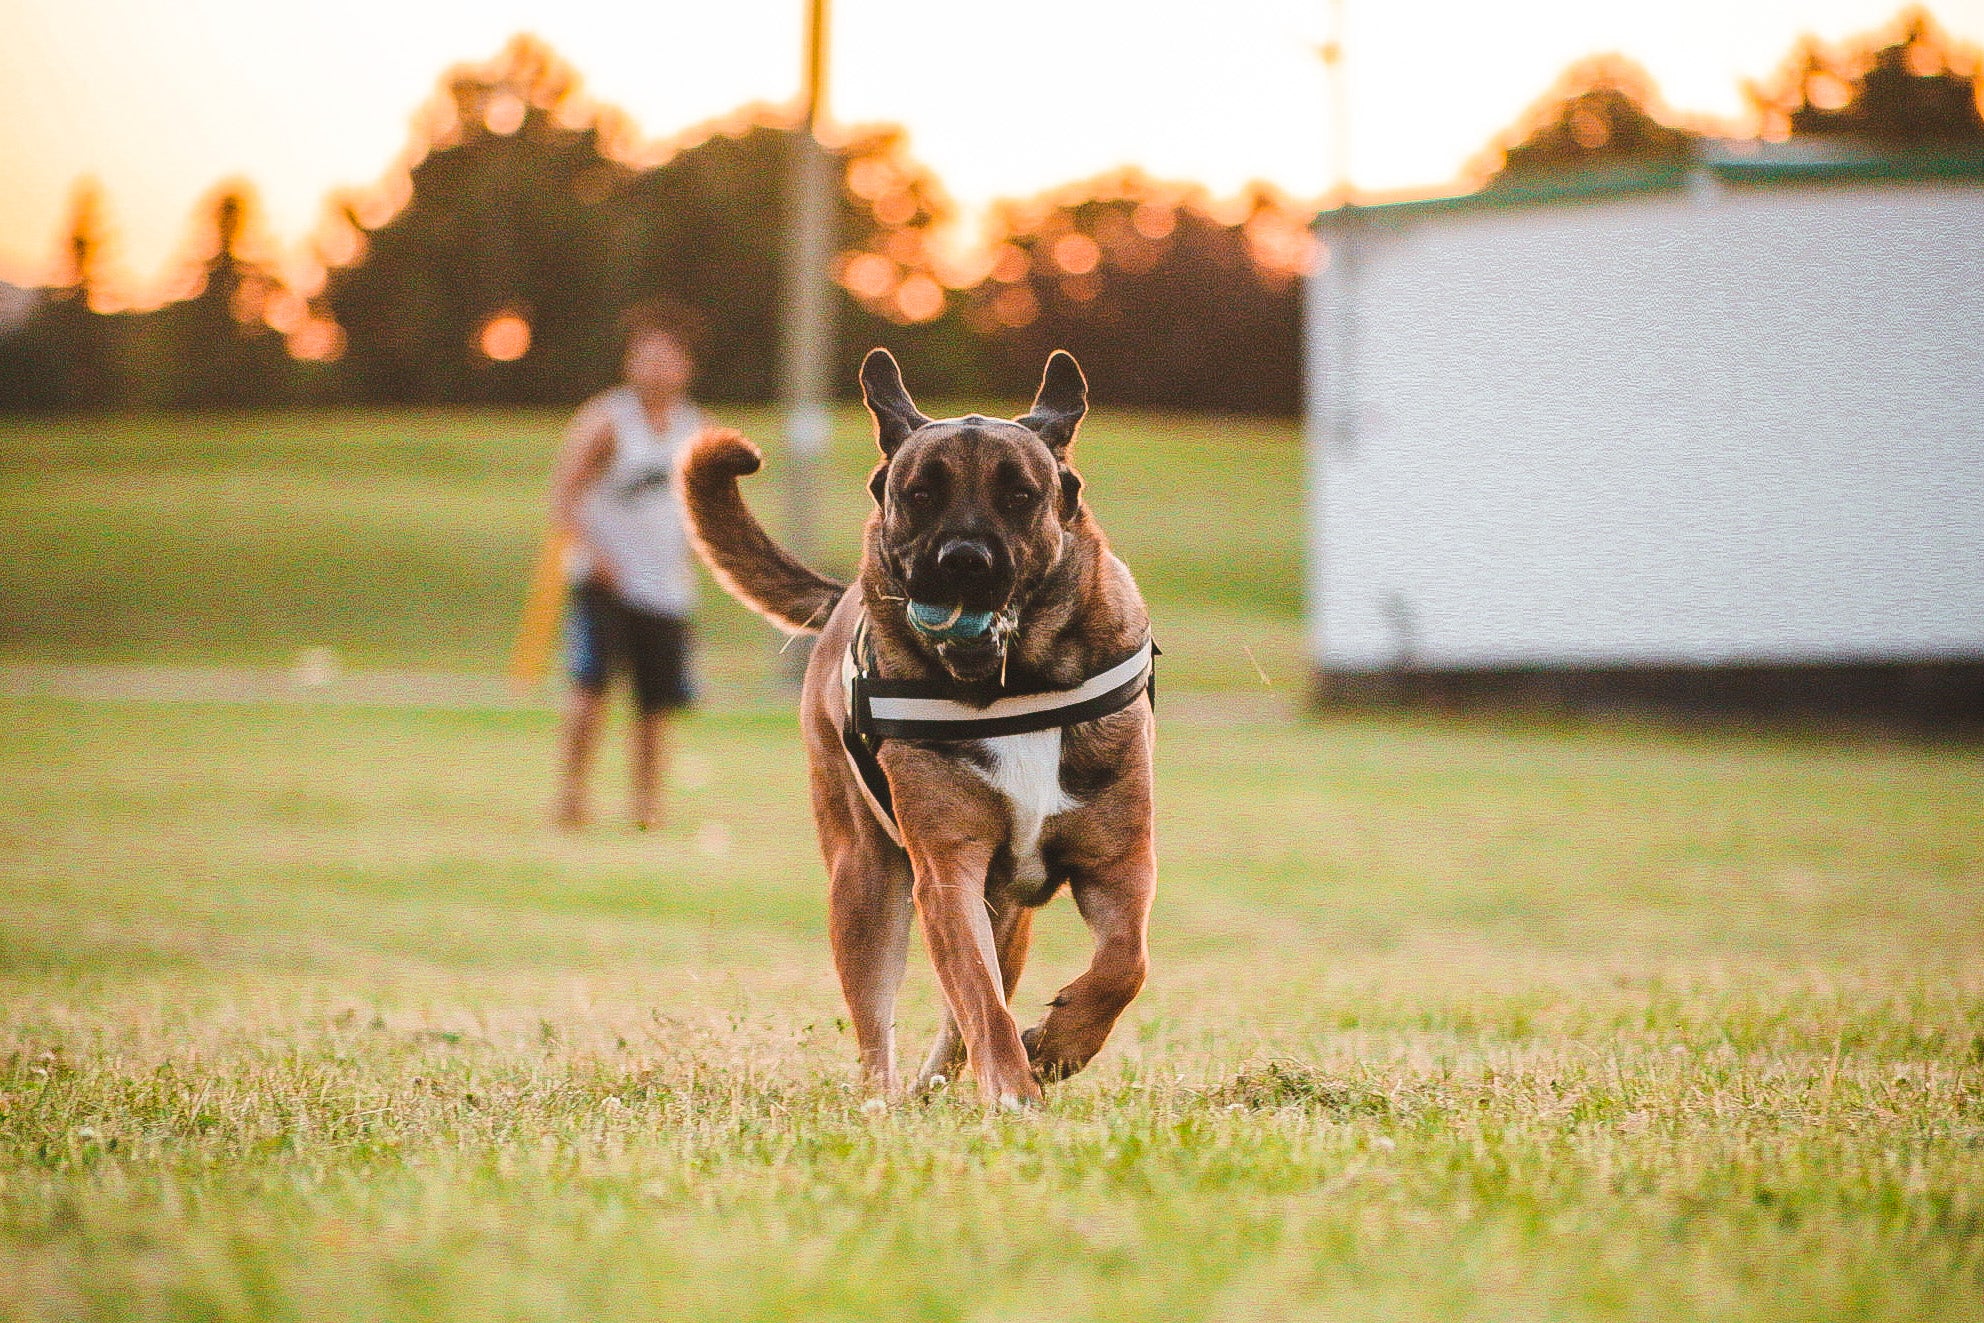 10 Fun Games to Play with Your Dog Before Summer is Over